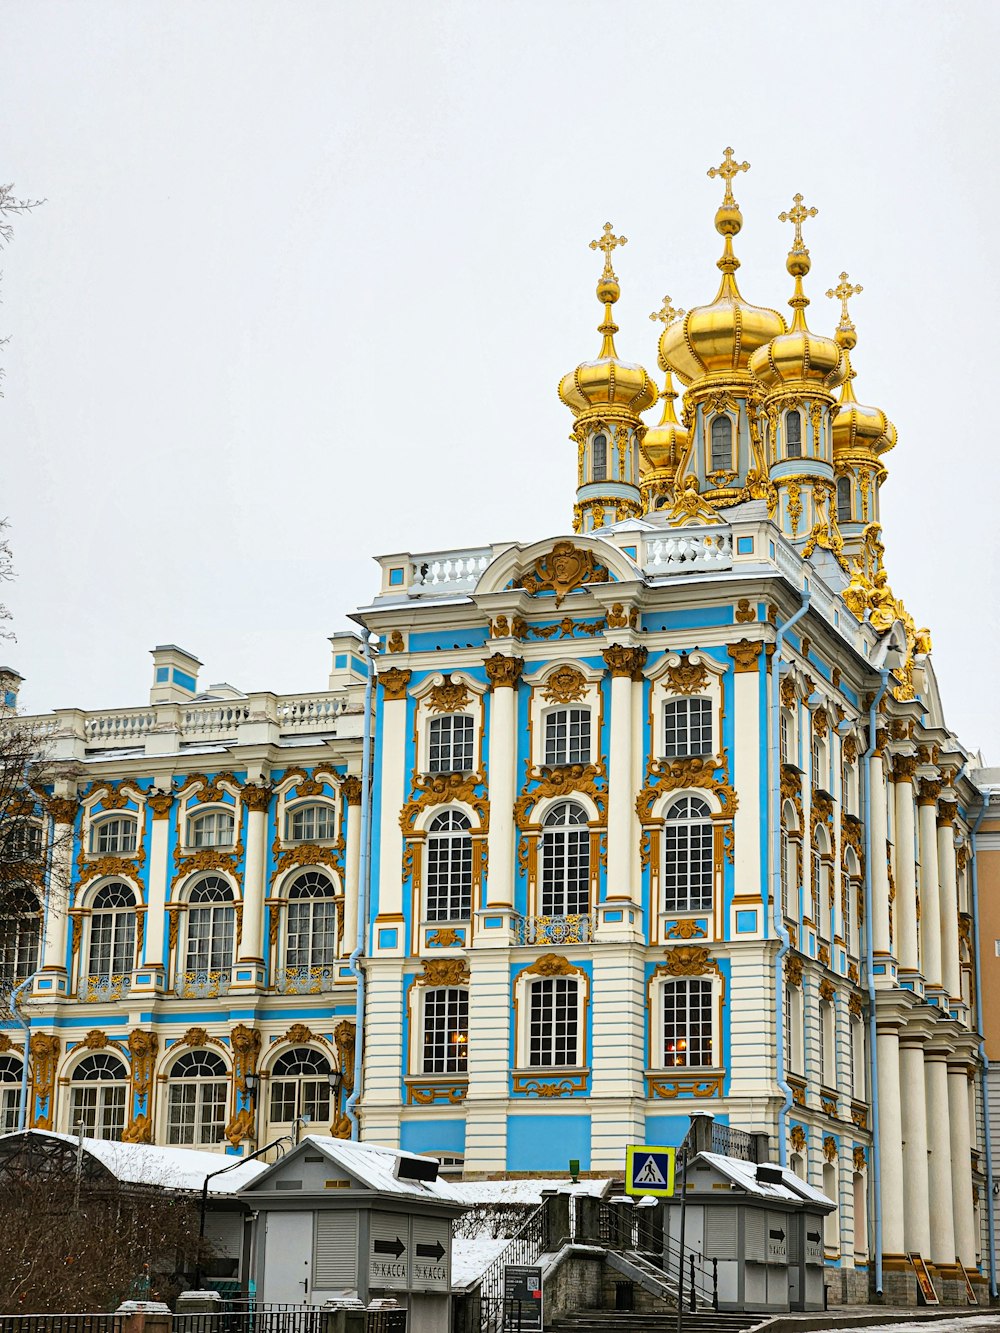 a large blue and white building with gold domes